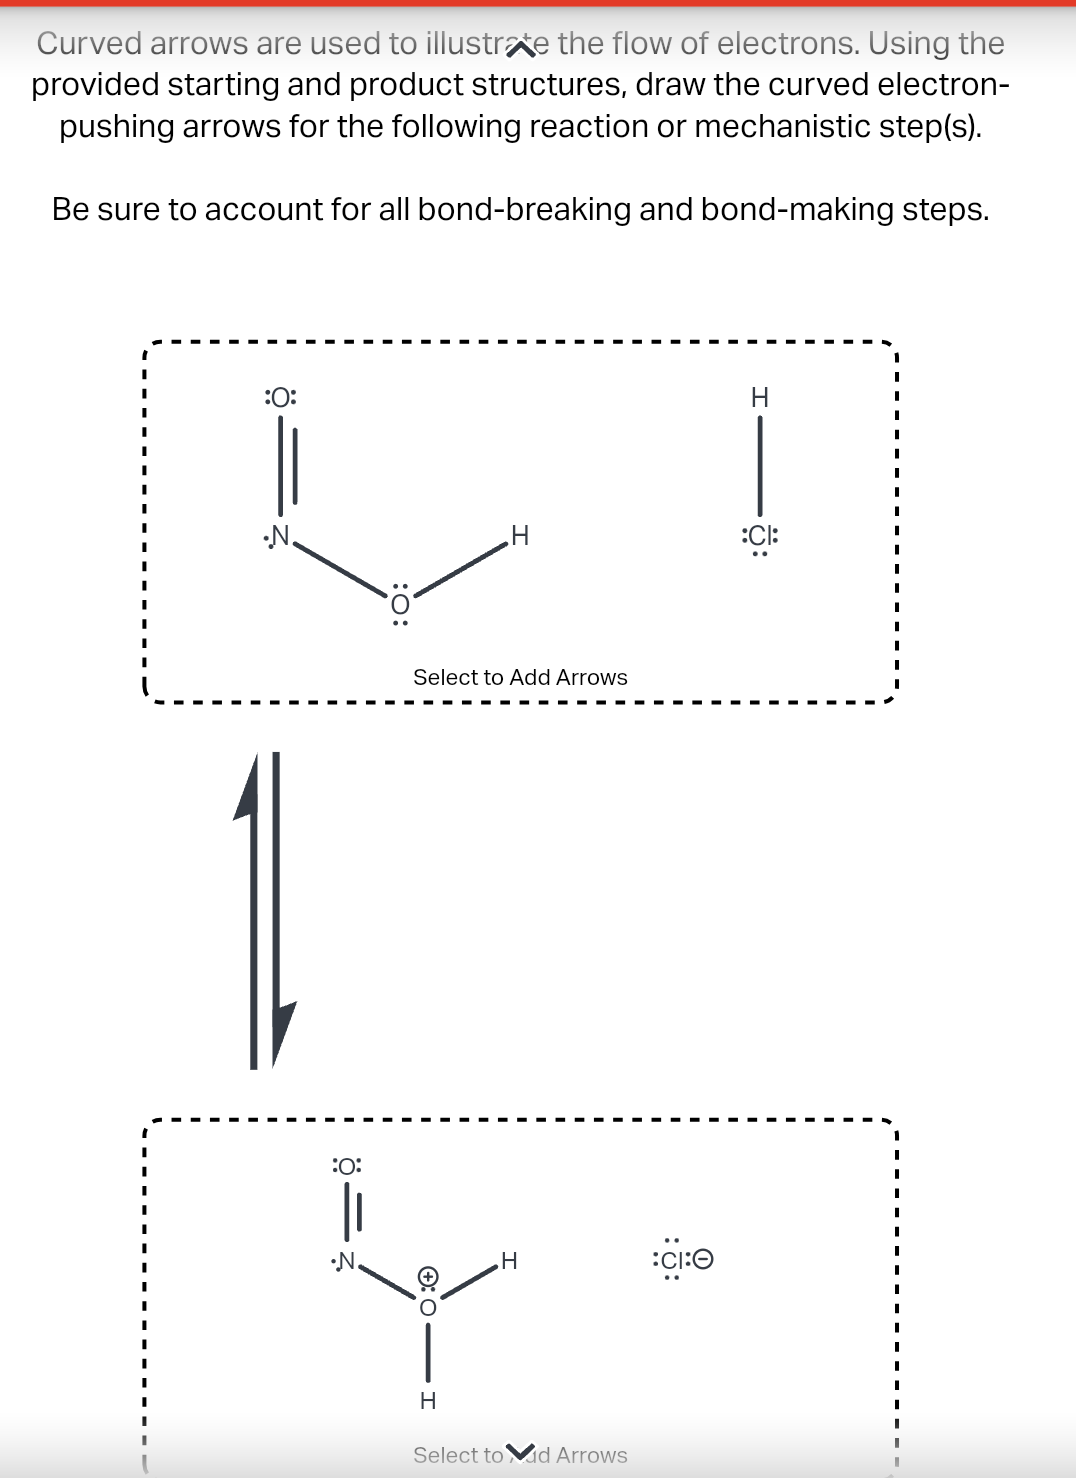 Curved arrows are used to illustrate the flow of electrons. Using the
provided starting and product structures, draw the curved electron-
pushing arrows for the following reaction or mechanistic step(s).
Be sure to account for all bond-breaking and bond-making steps.
:O:
•N.
:O:
•N.
:O:
Select to Add Arrows
Ⓒ:O-
H
H
H
Select to Mid Arrows
CI:O
H
:CI: